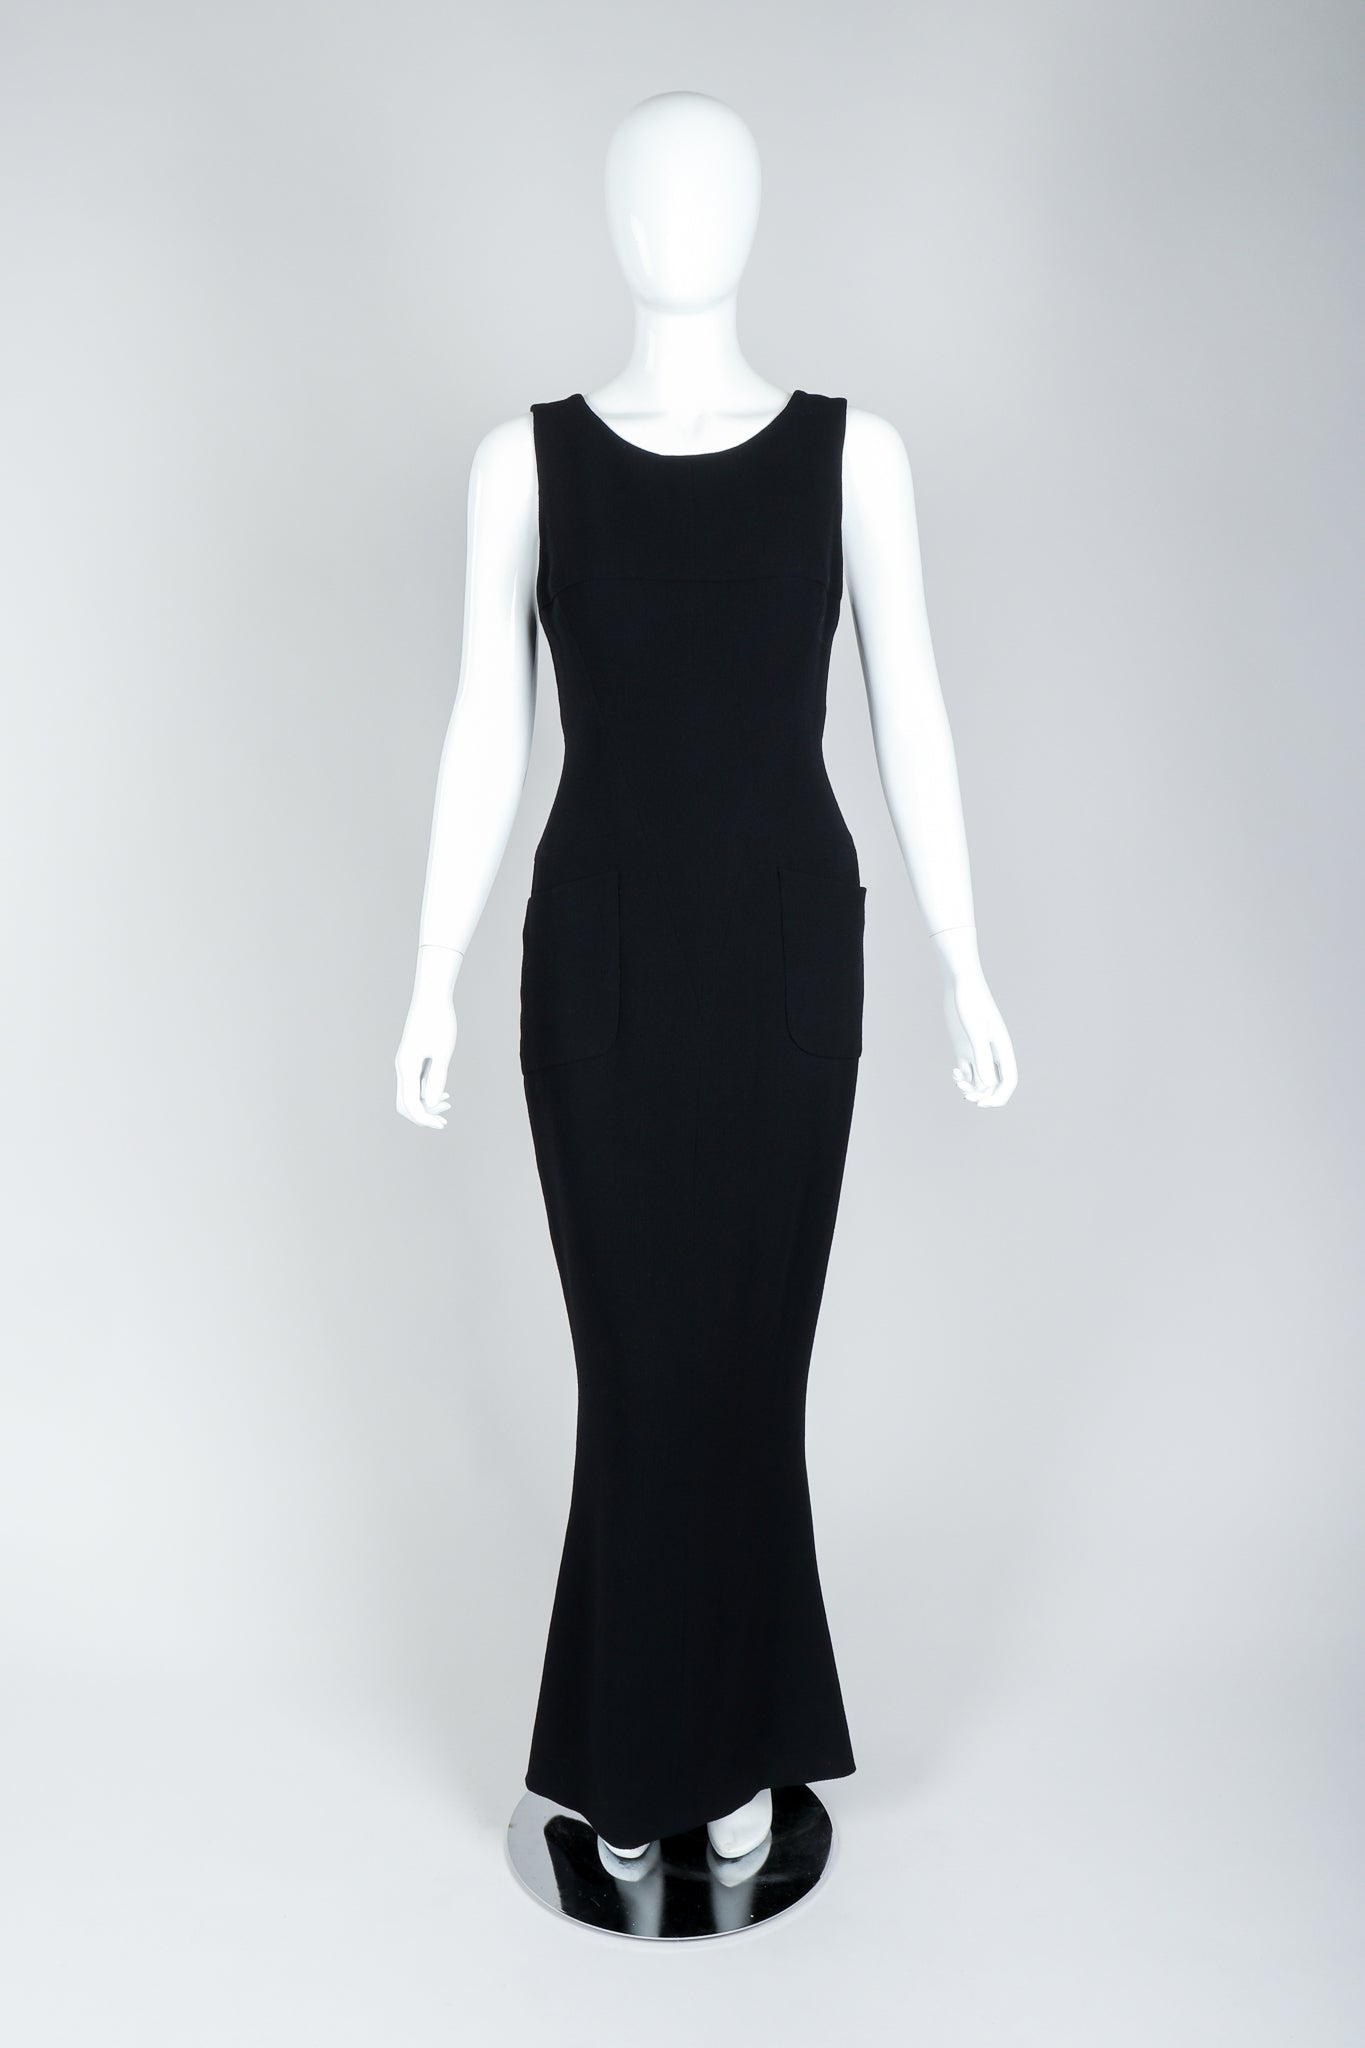 Vintage Chanel Breakfast At Tiffany's Style Black Fishtail Gown on Mannequin, Front